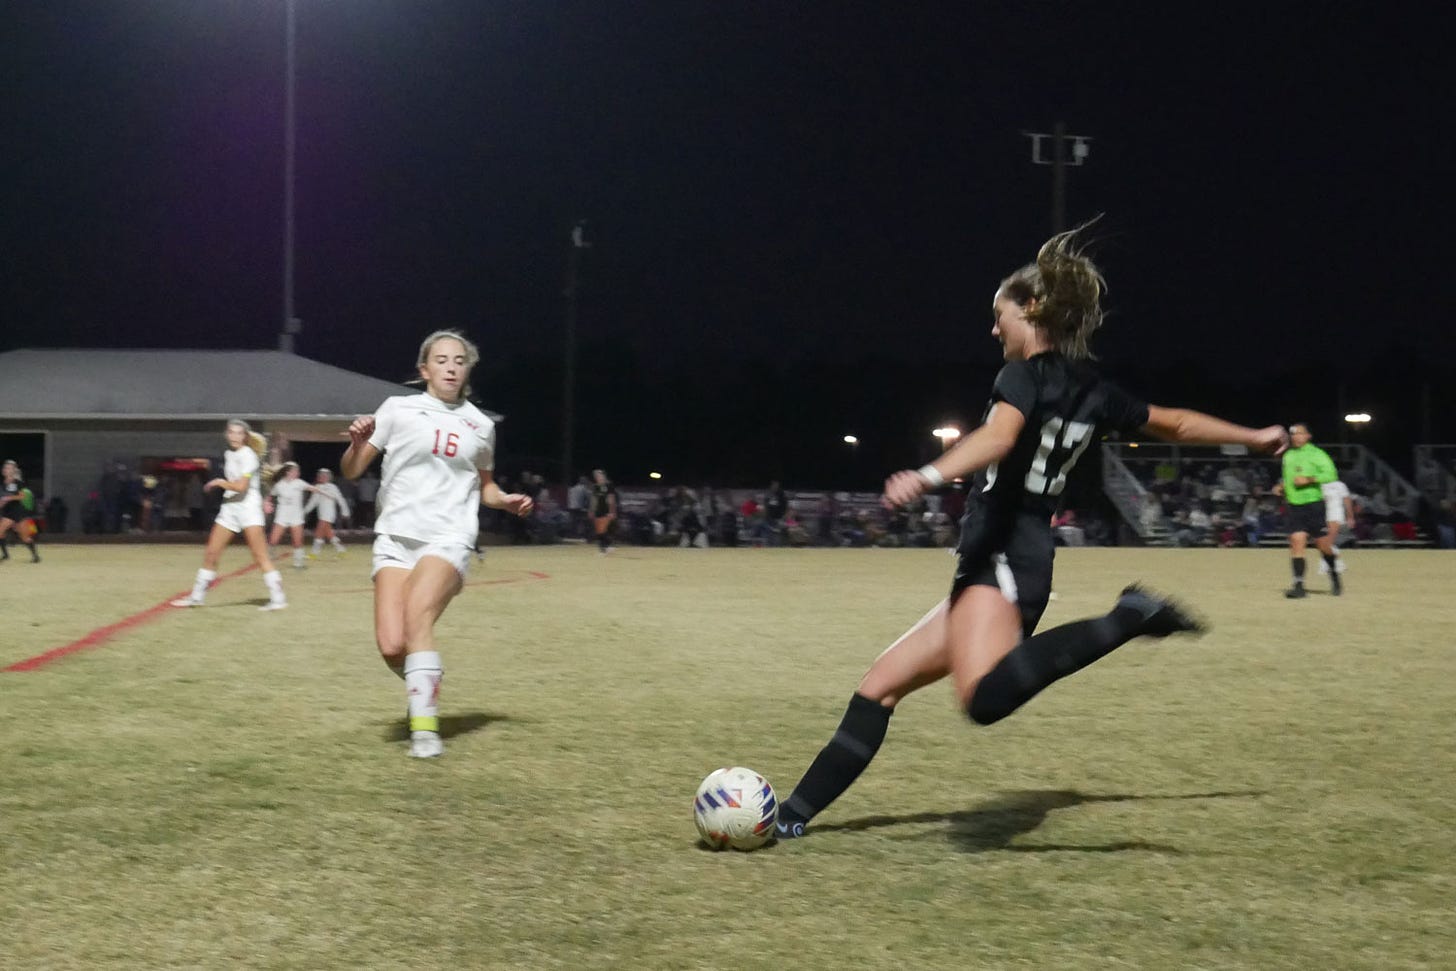 Bearden and West girls soccer playings competing.